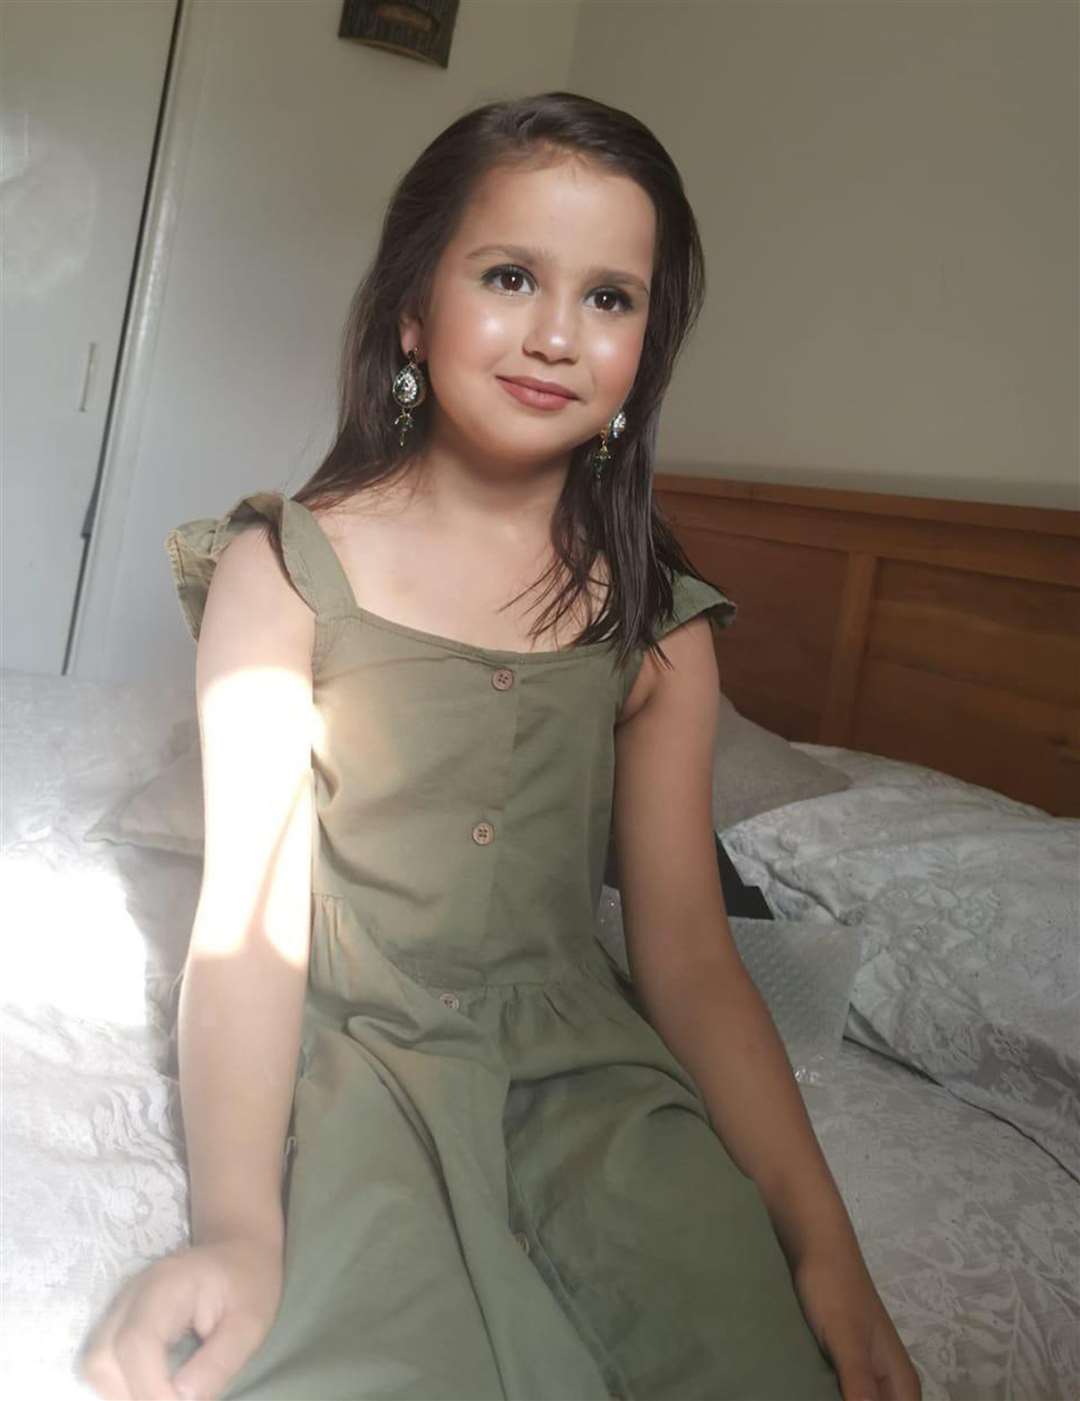 Ten-year-old Sara was found with multiple injuries at a home in Woking, Surrey, in August (Surrey Police/PA)